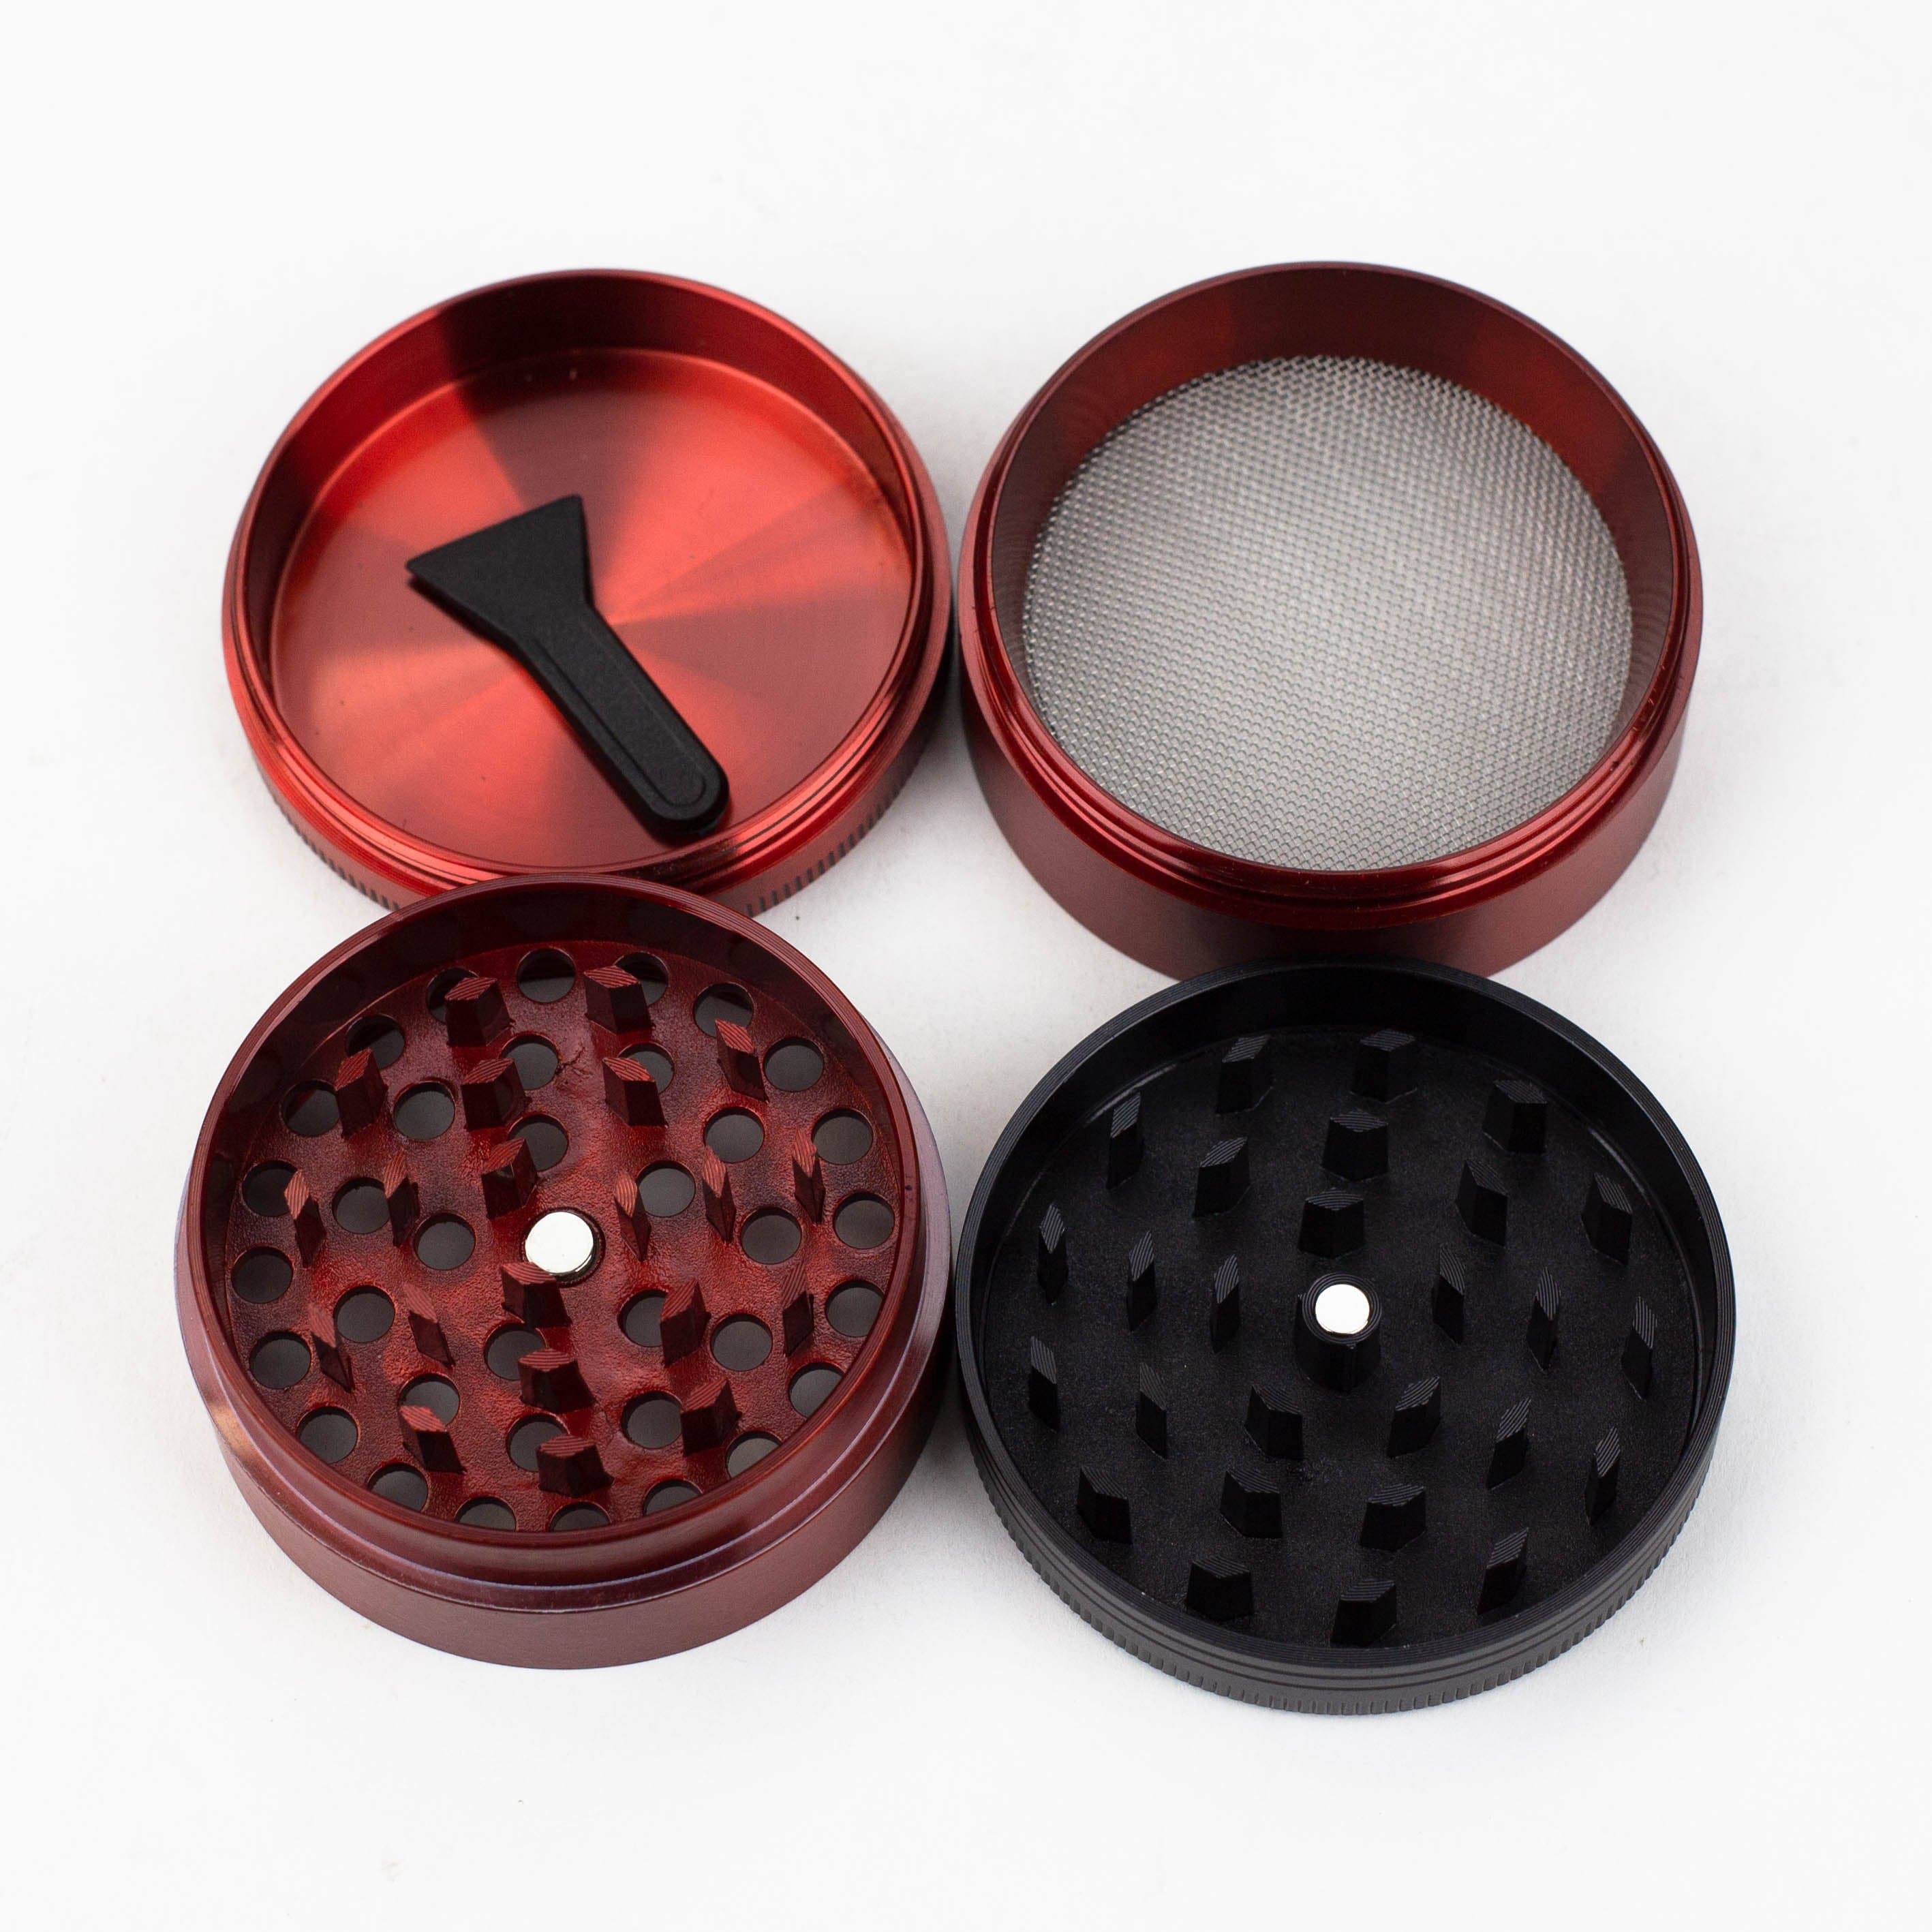 Death row 4 parts metal red grinder by infyniti_5